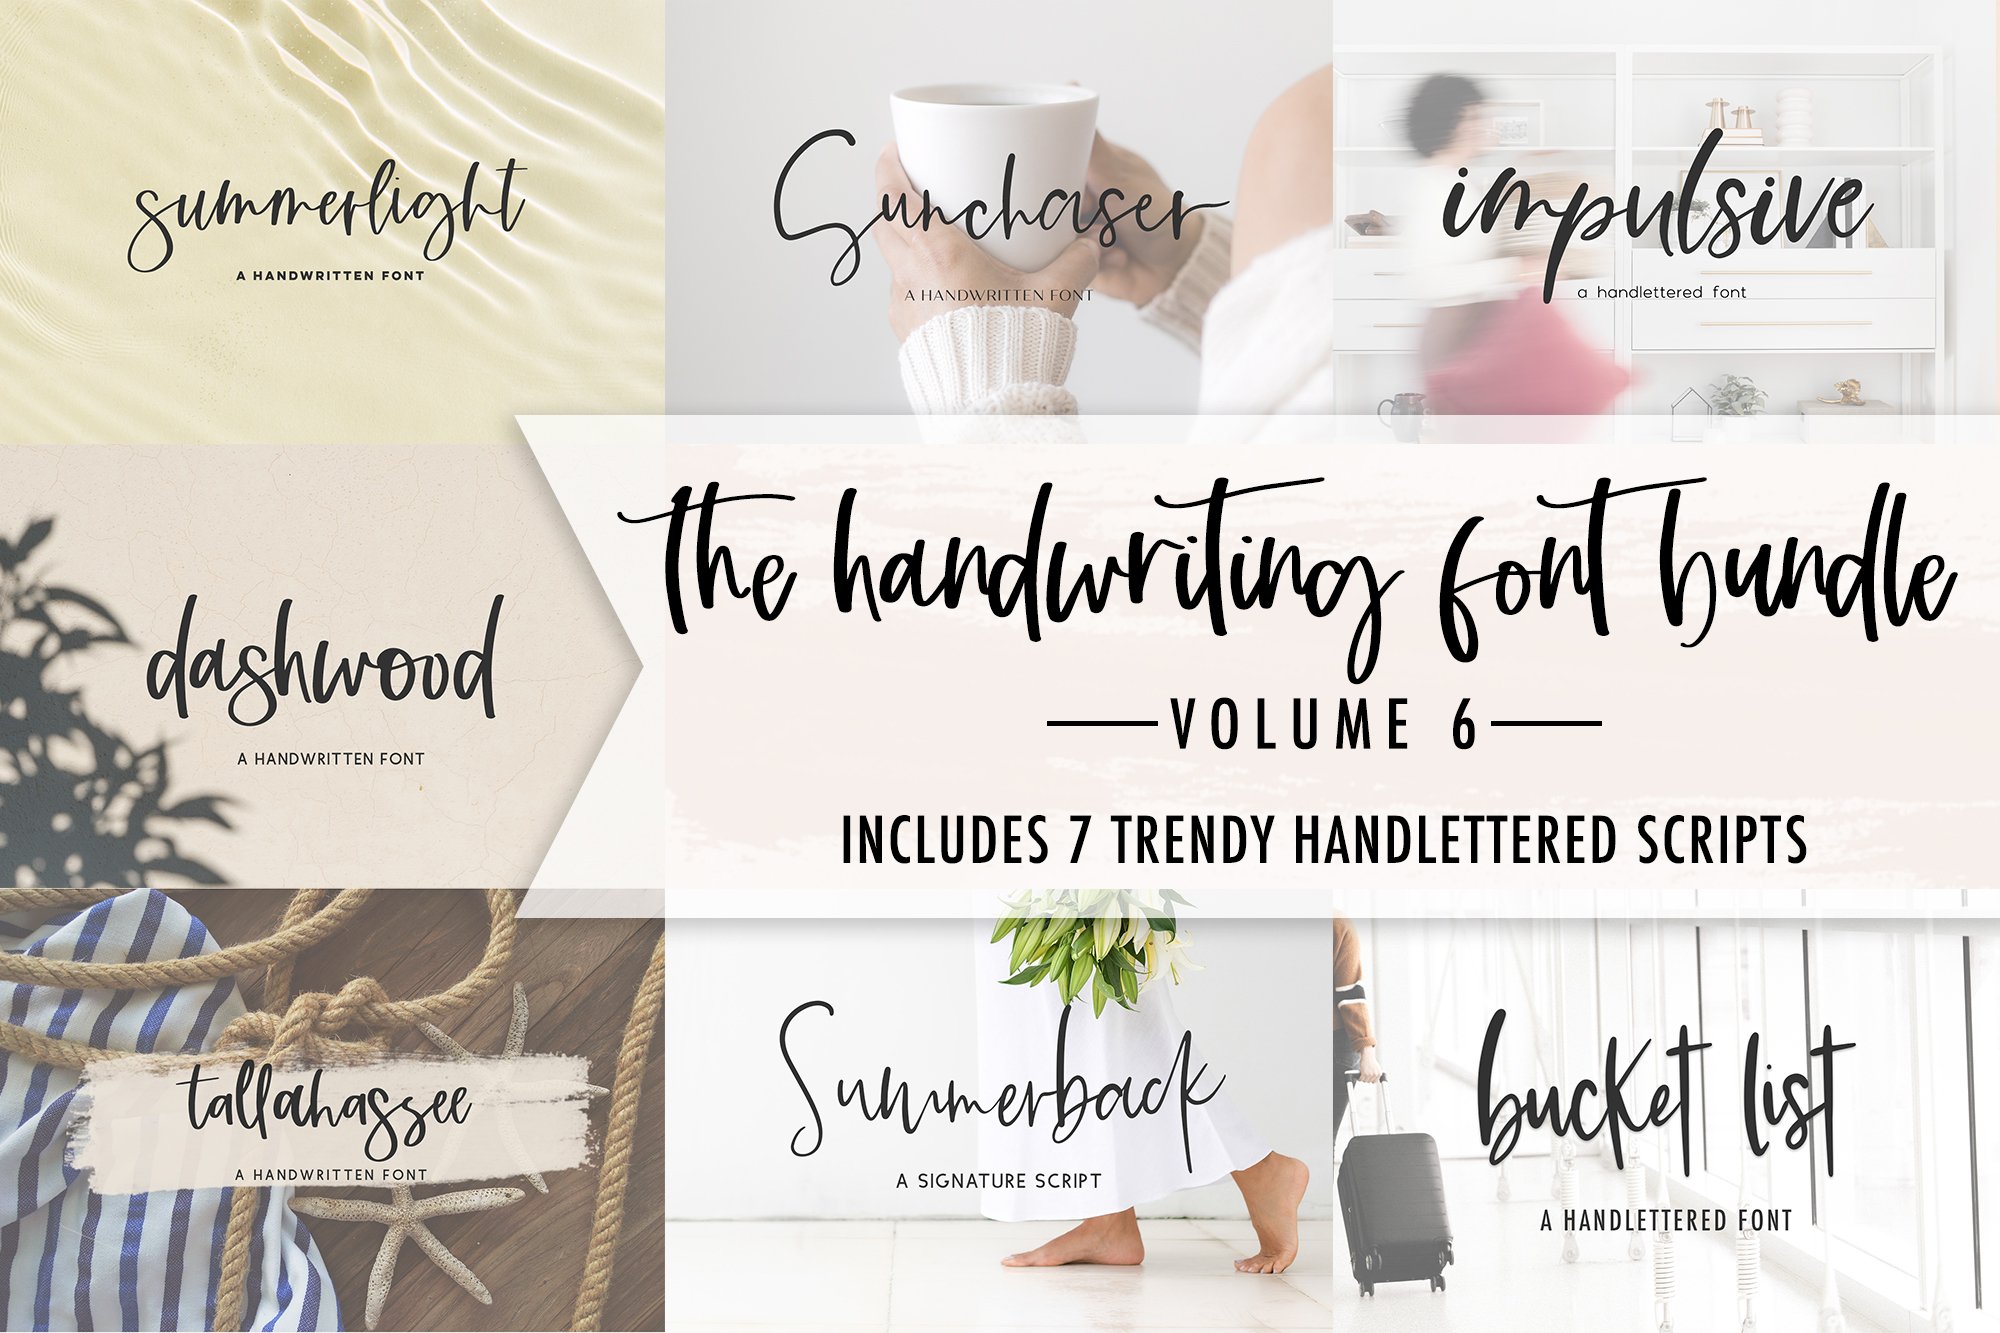 The Handwriting Font Bundle Volume 6 cover image.